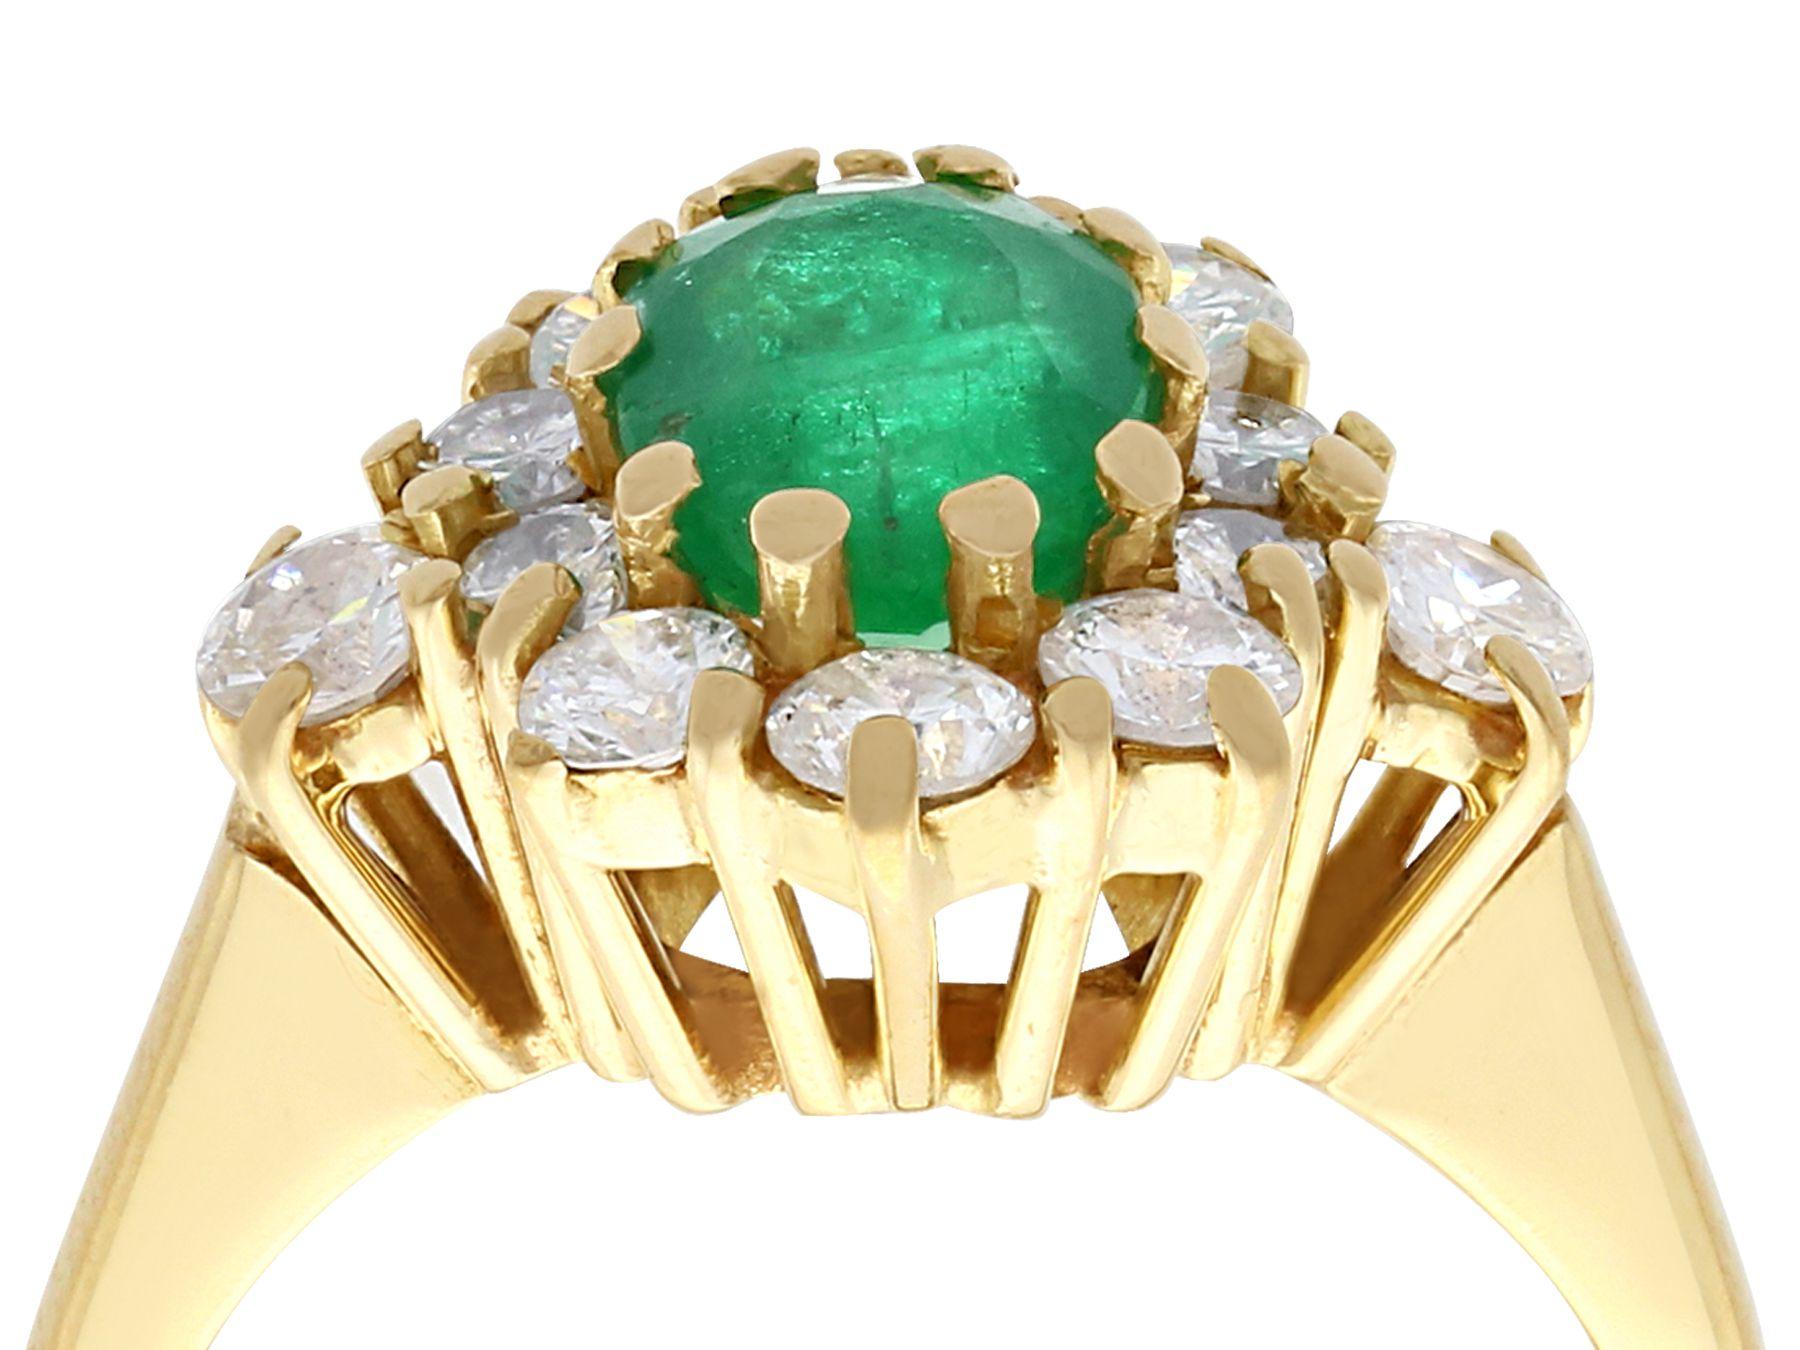 A fine and impressive vintage 1.30 carat emerald and 0.65 carat, 18 karat yellow gold cocktail ring; part of our diverse antique jewelry collections

This fine and impressive vintage emerald and diamond cluster ring has been crafted in 18k yellow